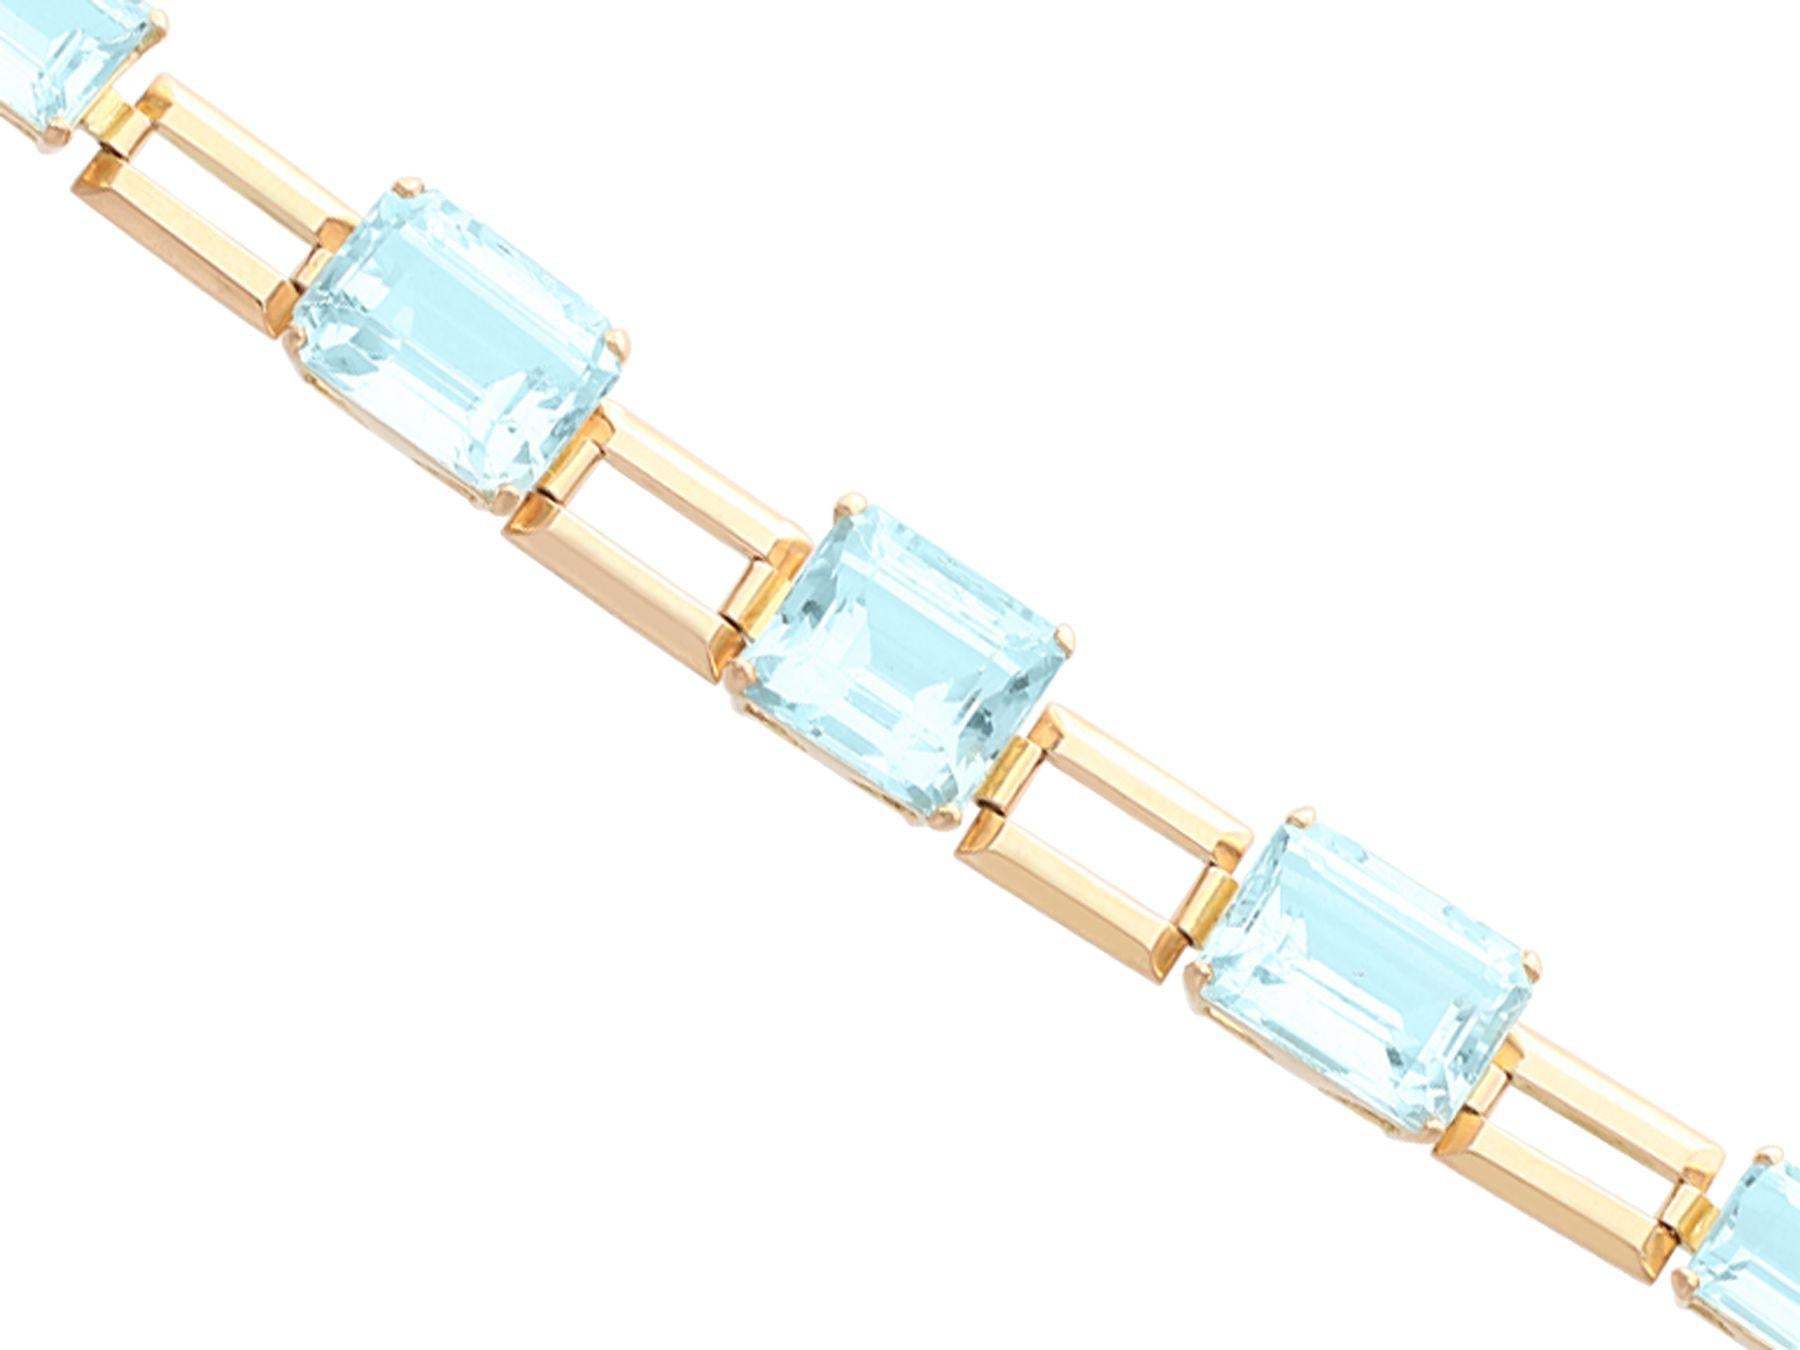 A stunning, fine and impressive vintage Art Deco 39.87 carat aquamarine and 18 karat yellow gold bracelet; part of our diverse antique jewelry and estate jewelry collections.

This stunning, fine and impressive vintage aquamarine bracelet has been